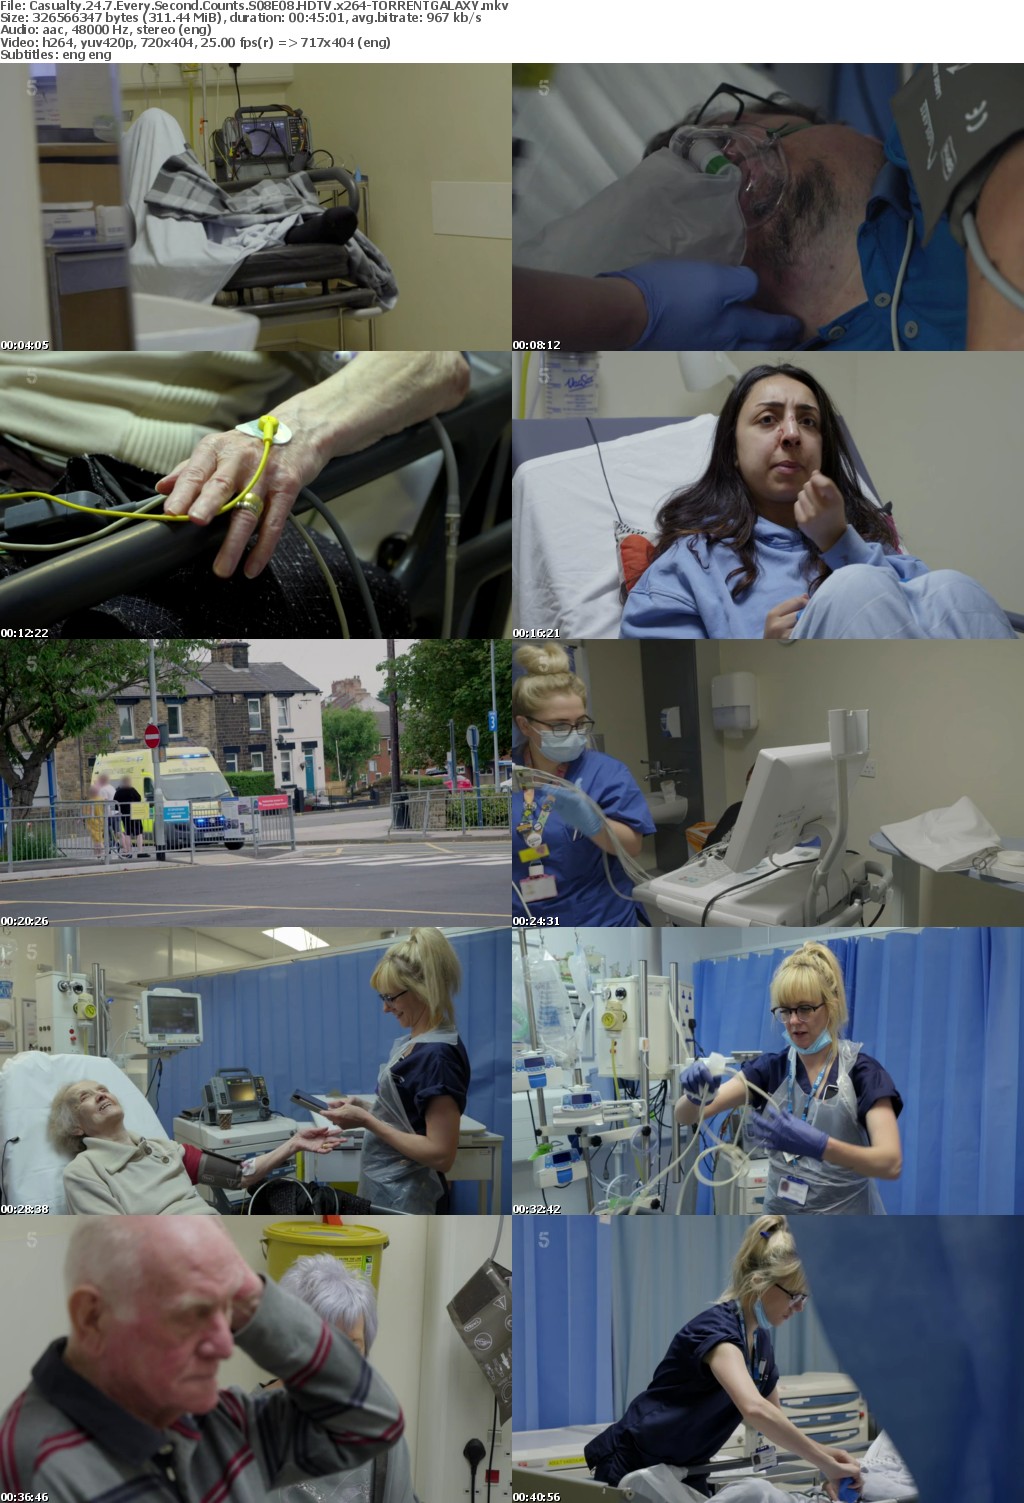 Casualty 24 7 Every Second Counts S08E08 HDTV x264-GALAXY